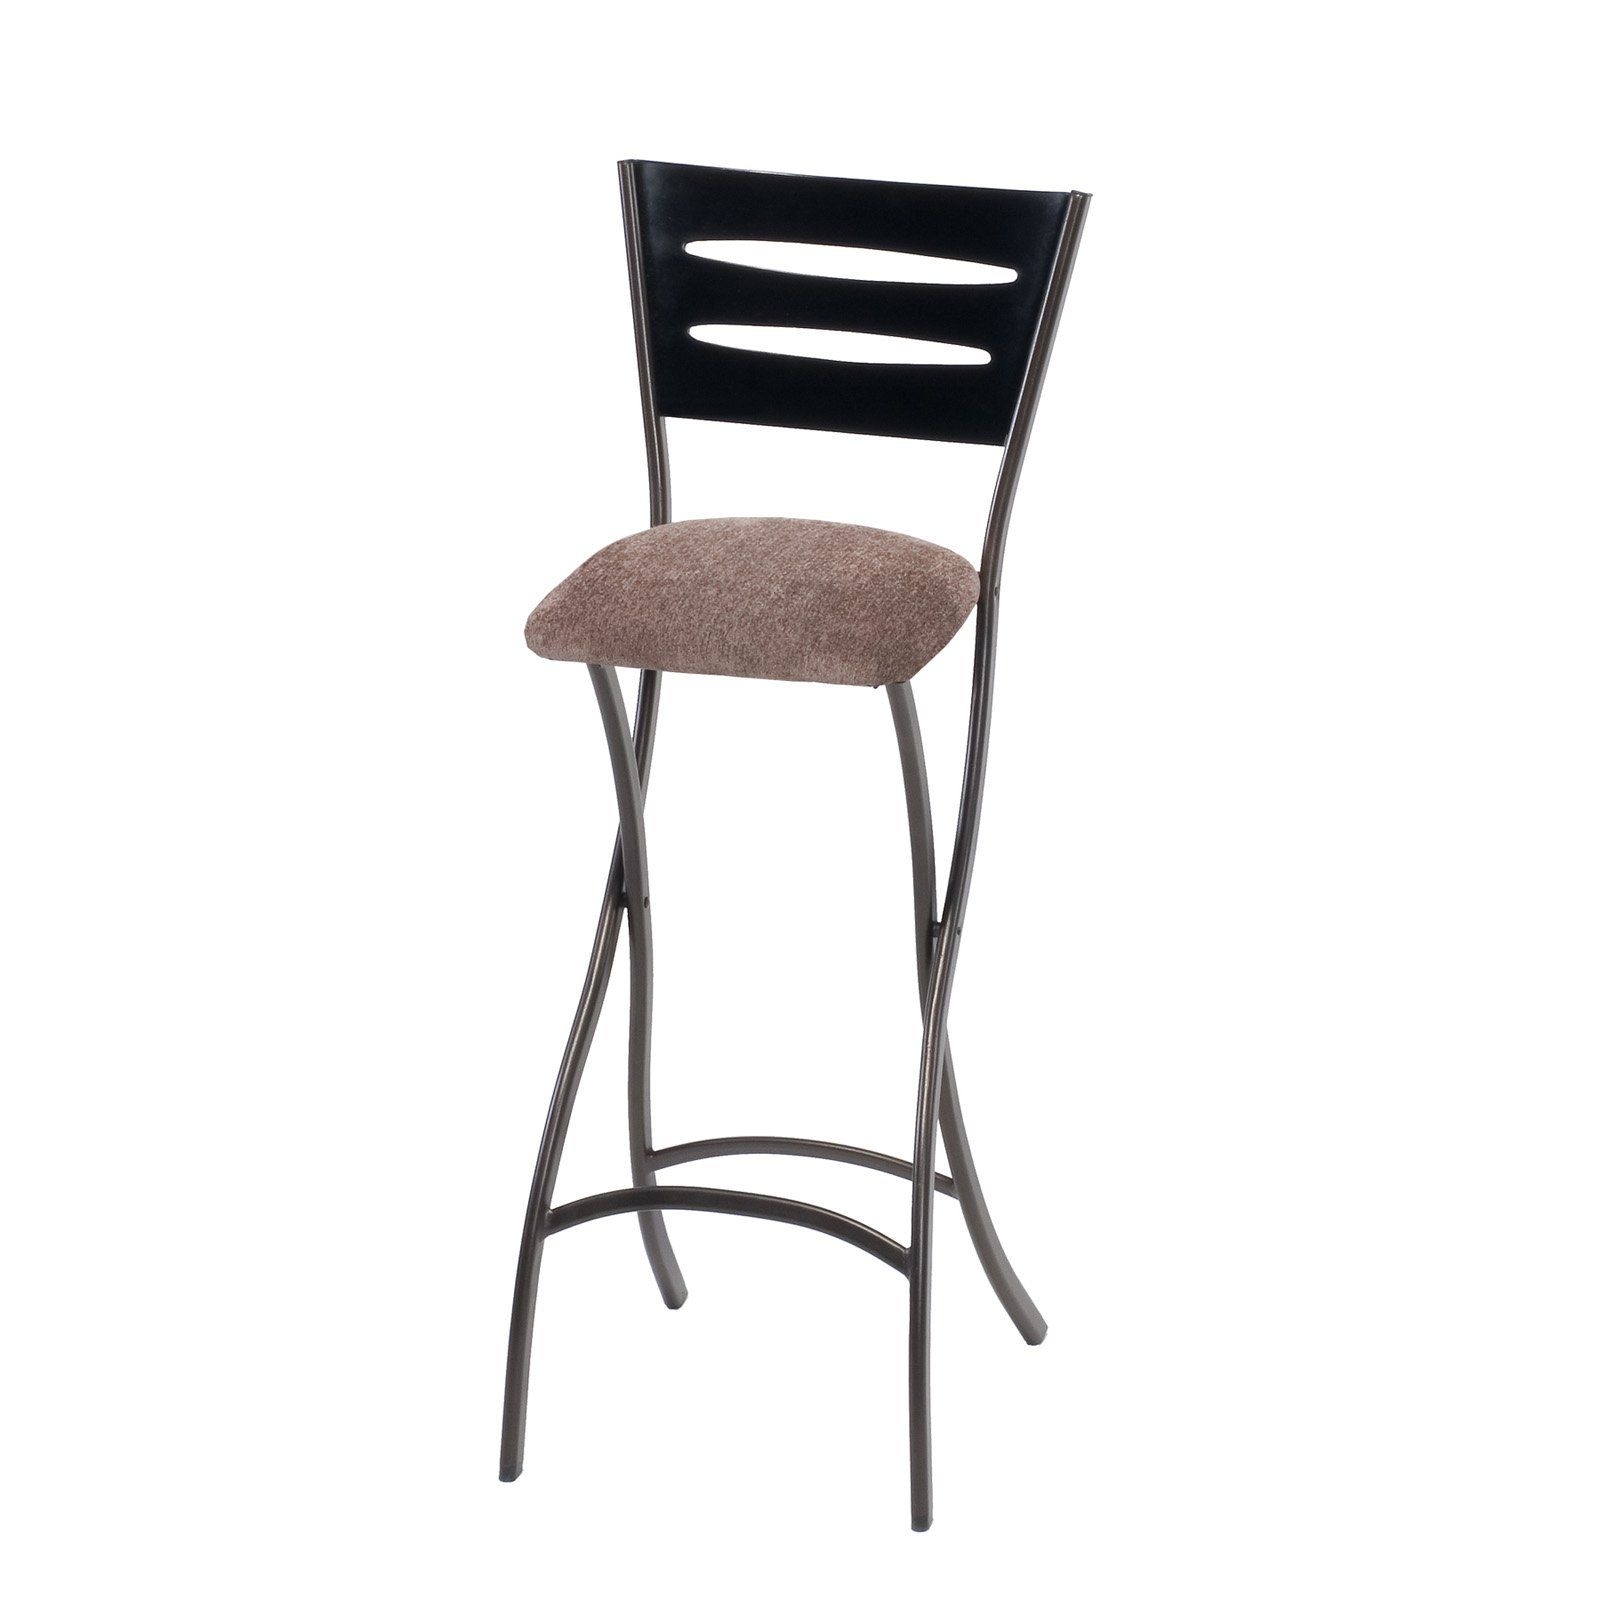 Counter height folding chair